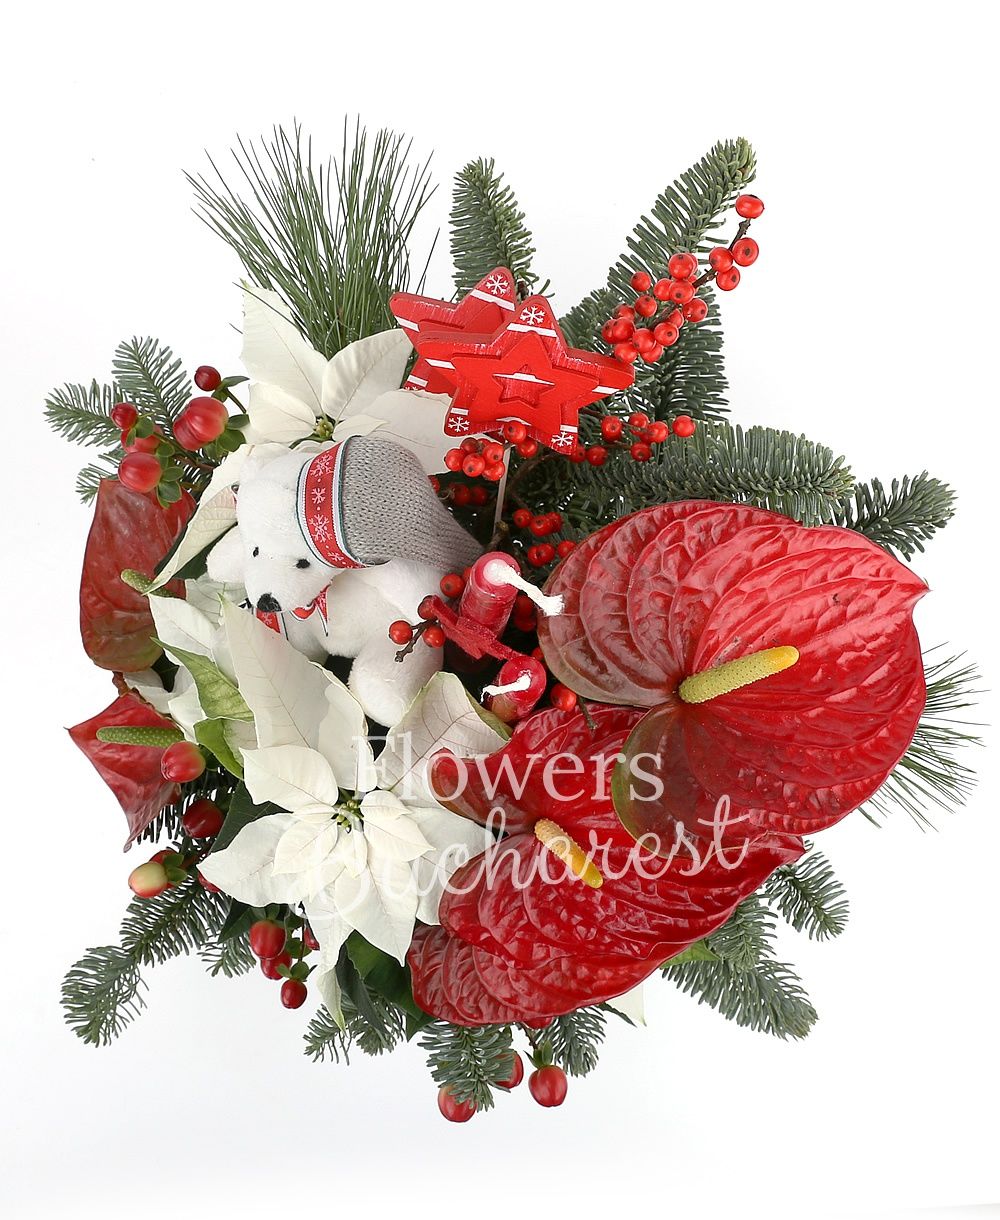 5 mini anthurium, 2 white euphorbia, small teddy bear, 3 red hypericum, 2 candles, fir tree, christmas decorations, vase